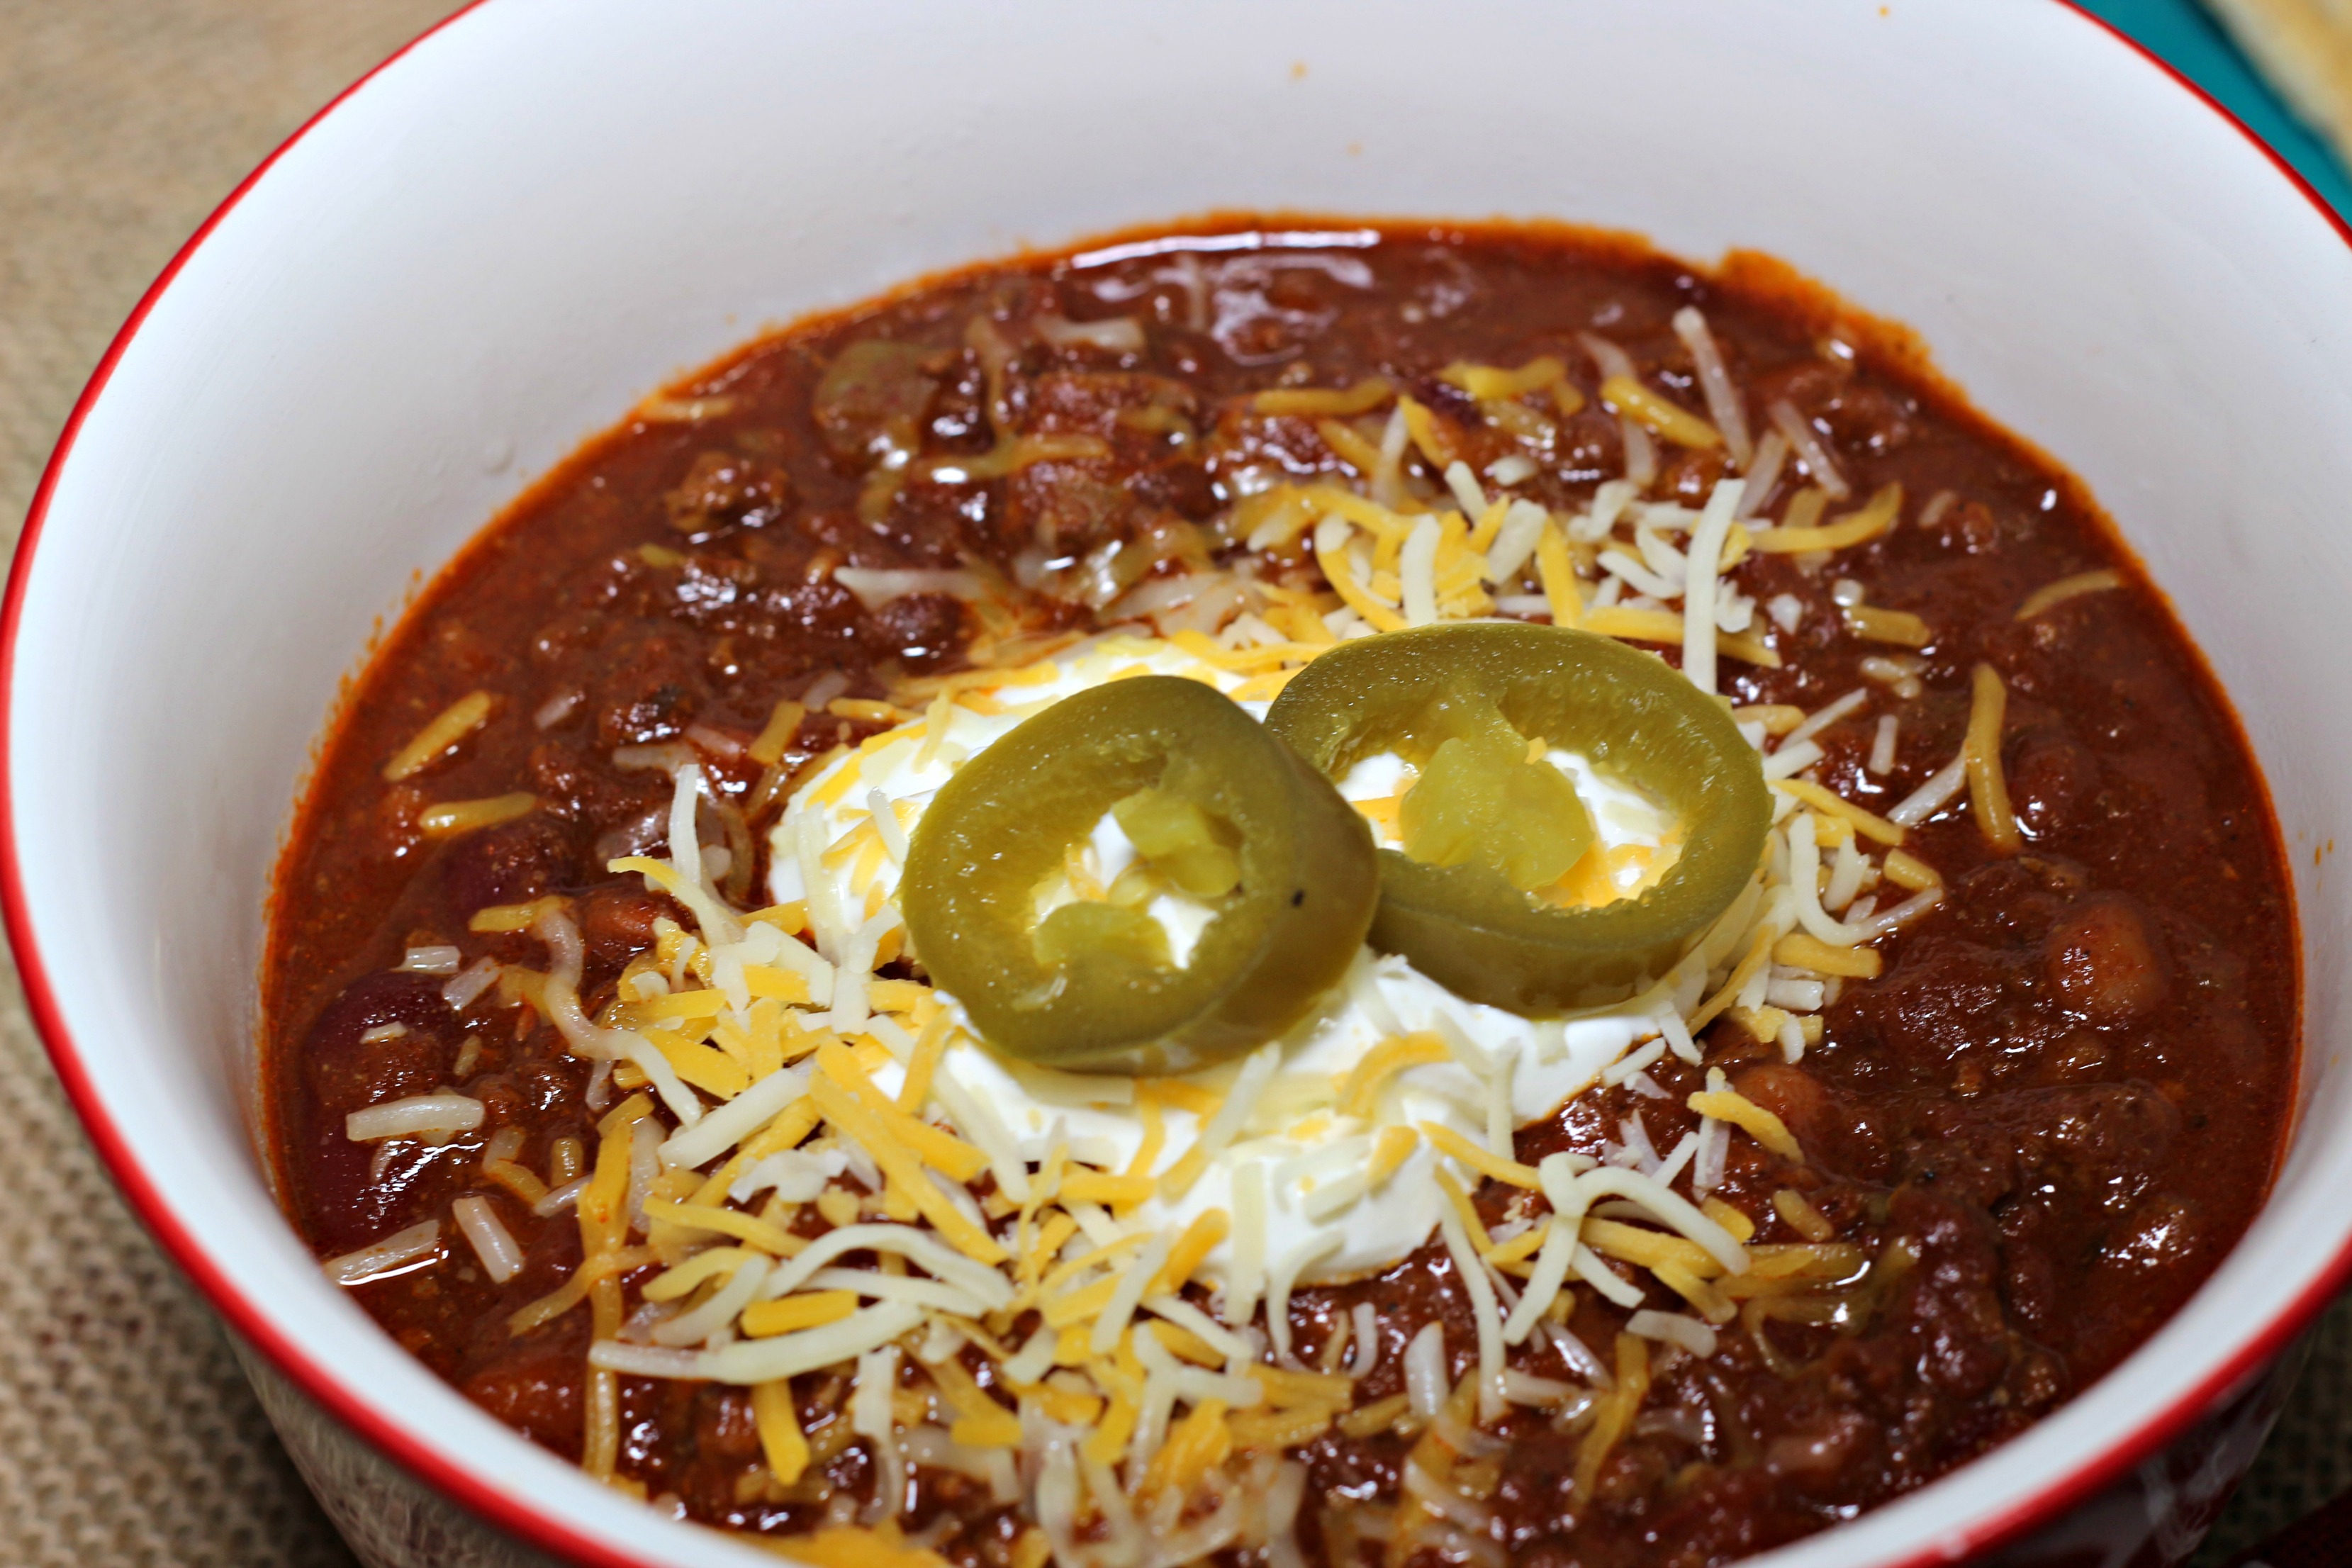 How to make kick-ass crock pot chili|Ripped Jeans and Bifocals